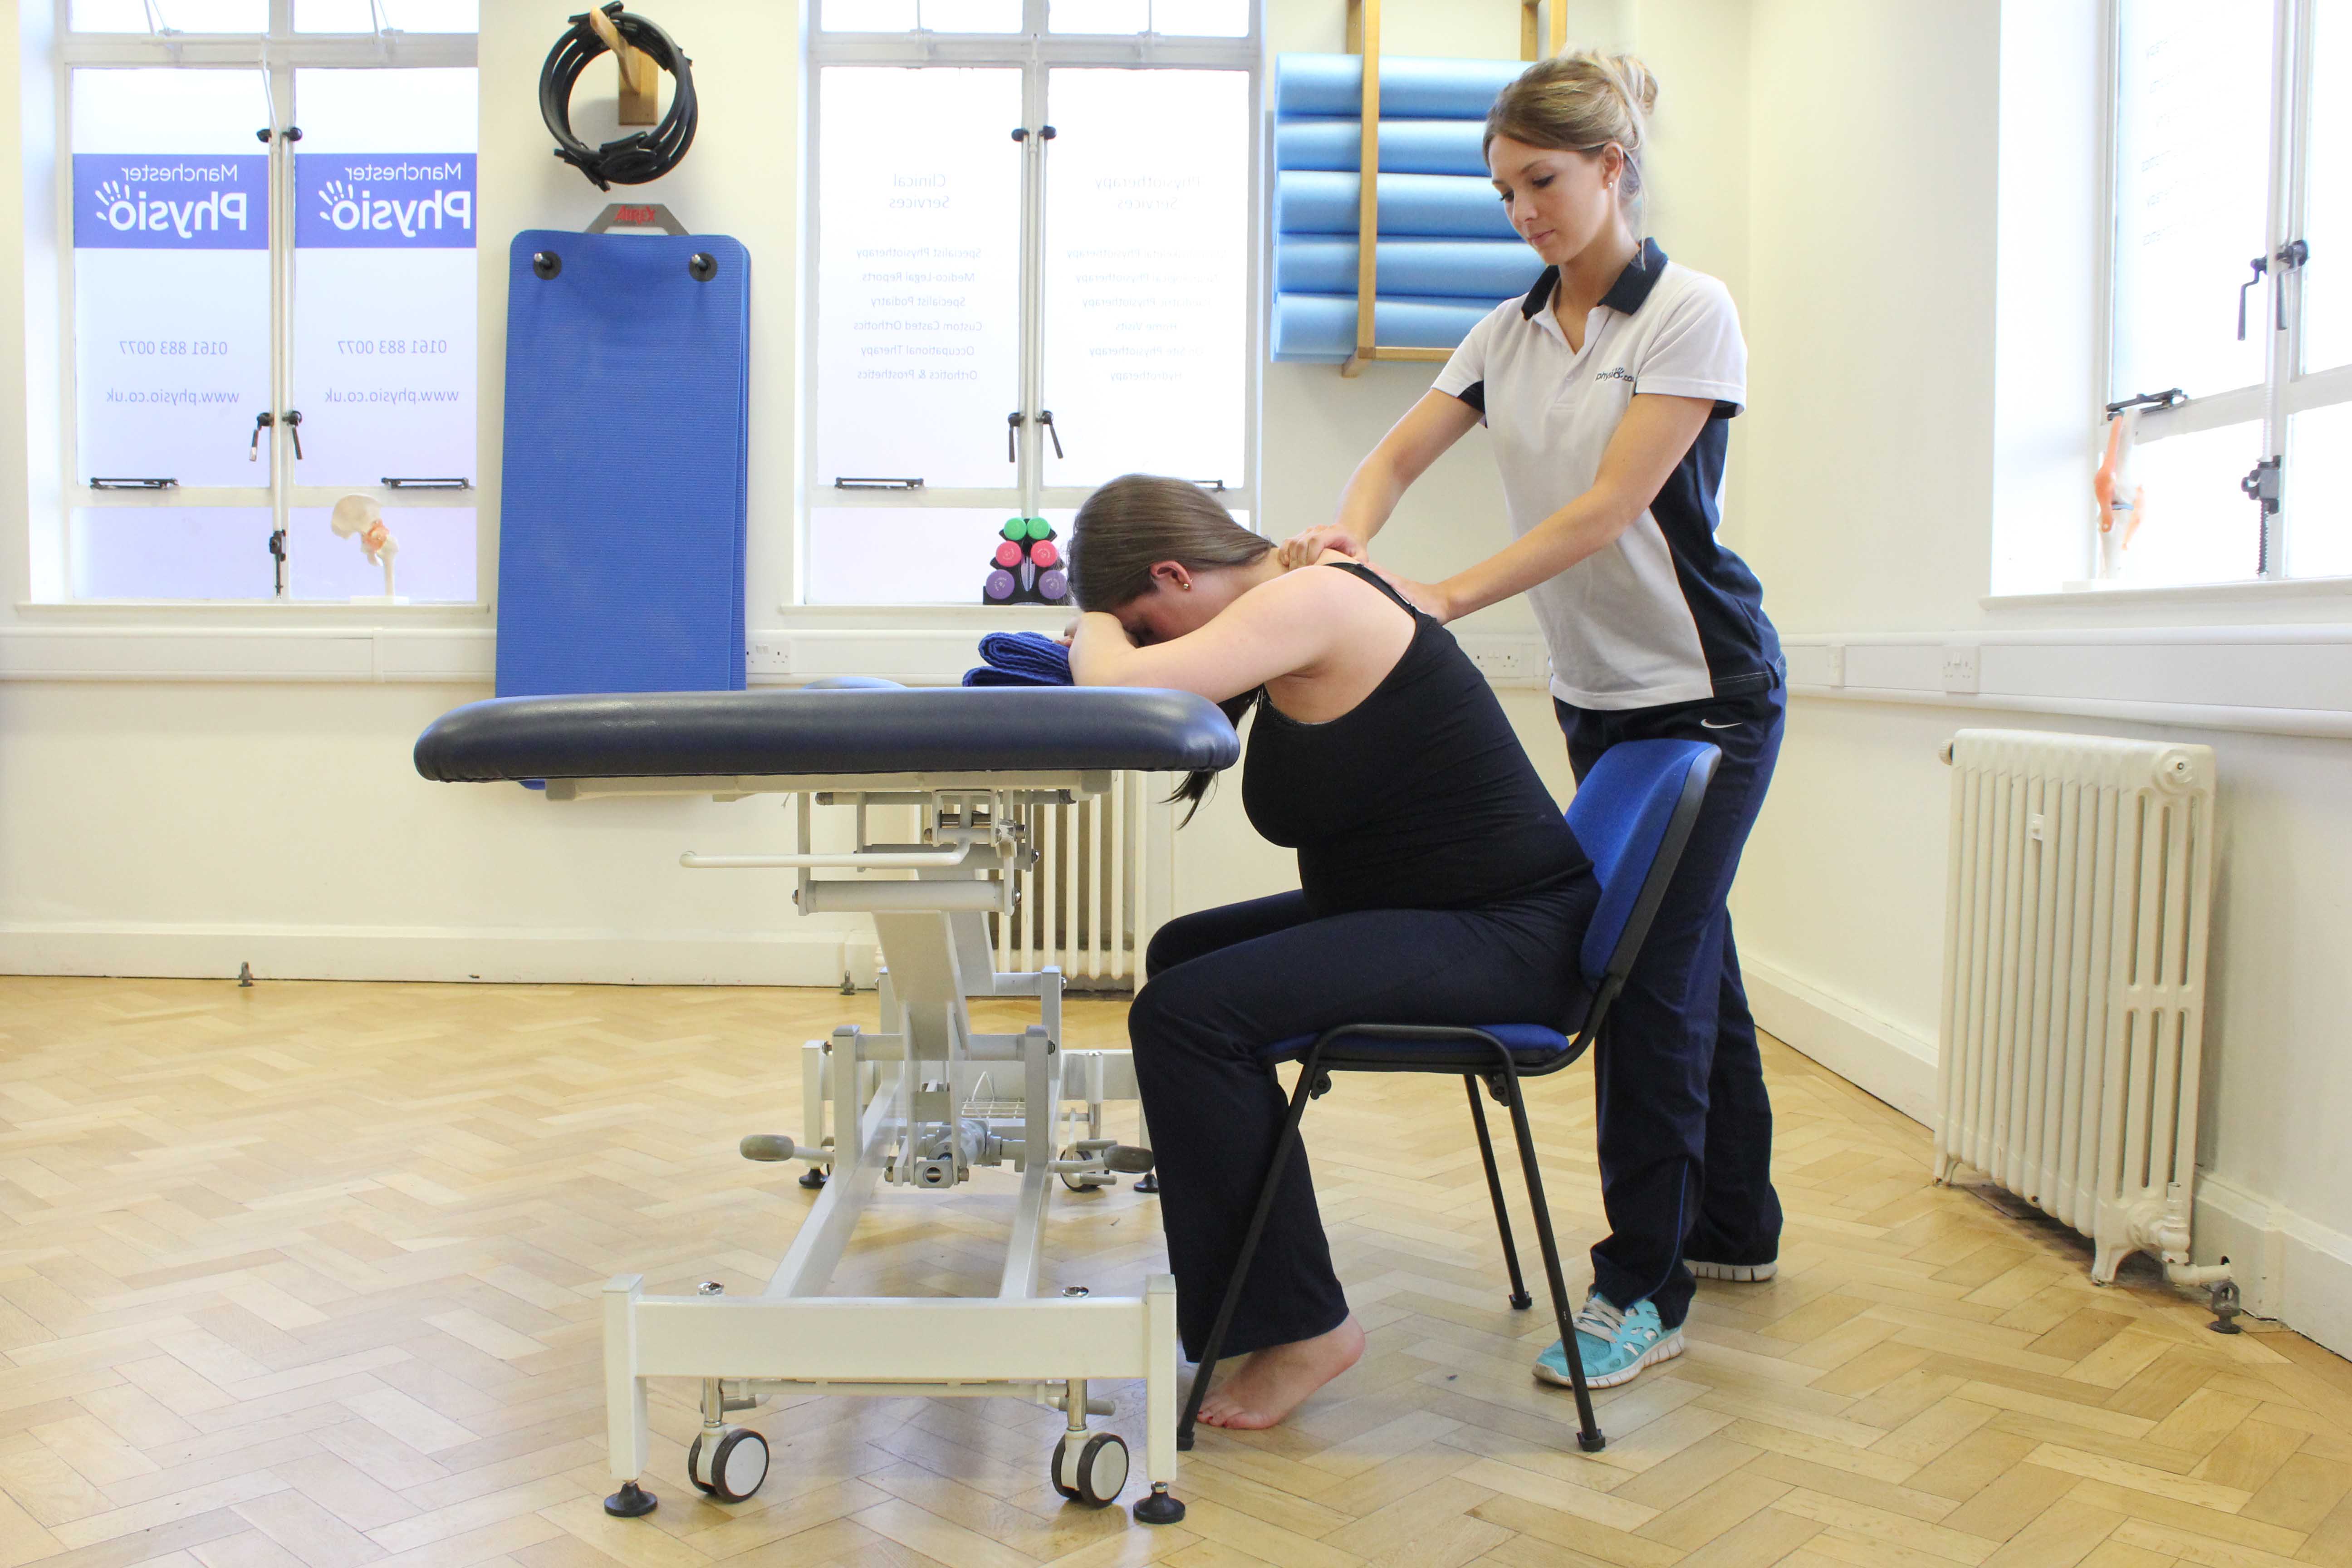 Assessment of the cervical spine, muscles and connective tissues in the neck performed by an experienced Physiotherapist